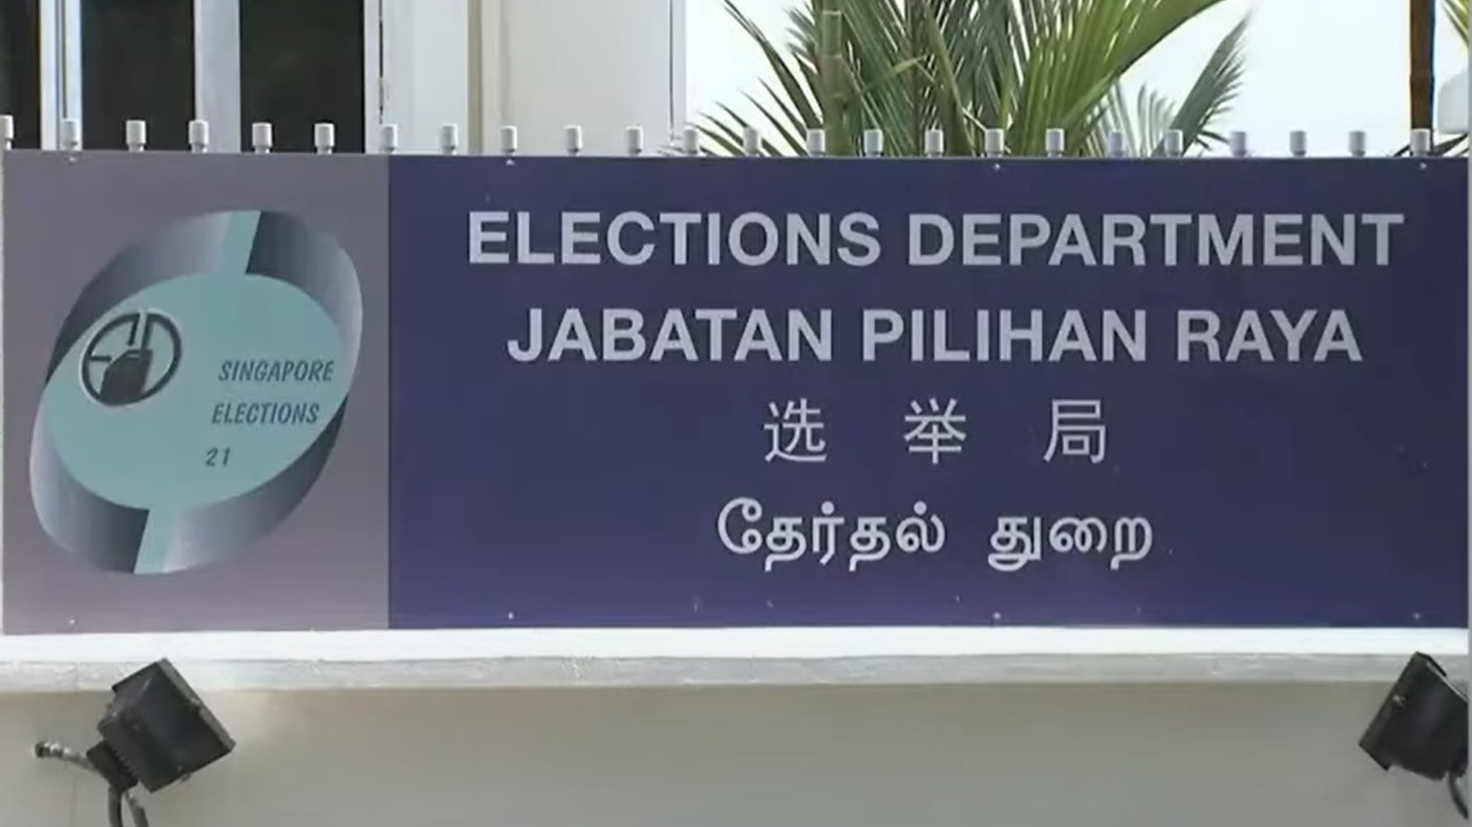 Elections Department to open application period for Presidential Election tomorrow, days after Tharman announced plans to contest